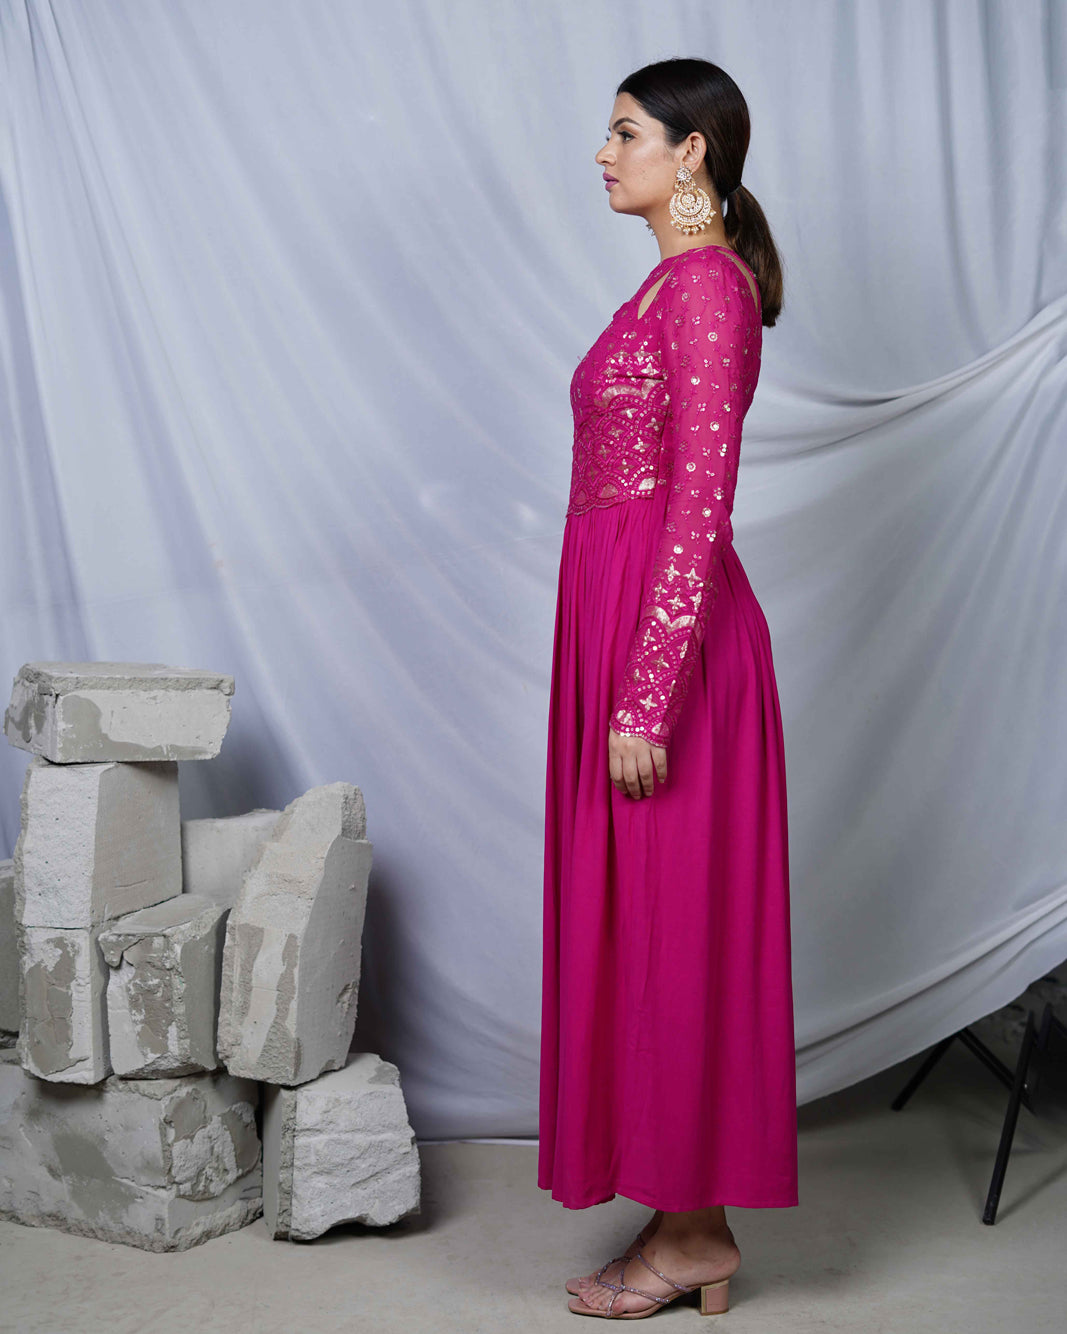 Razia Hot Pink Indo- Western Womens Party Maxi Dress with Embroidery and Cut Out Details for Cocktail